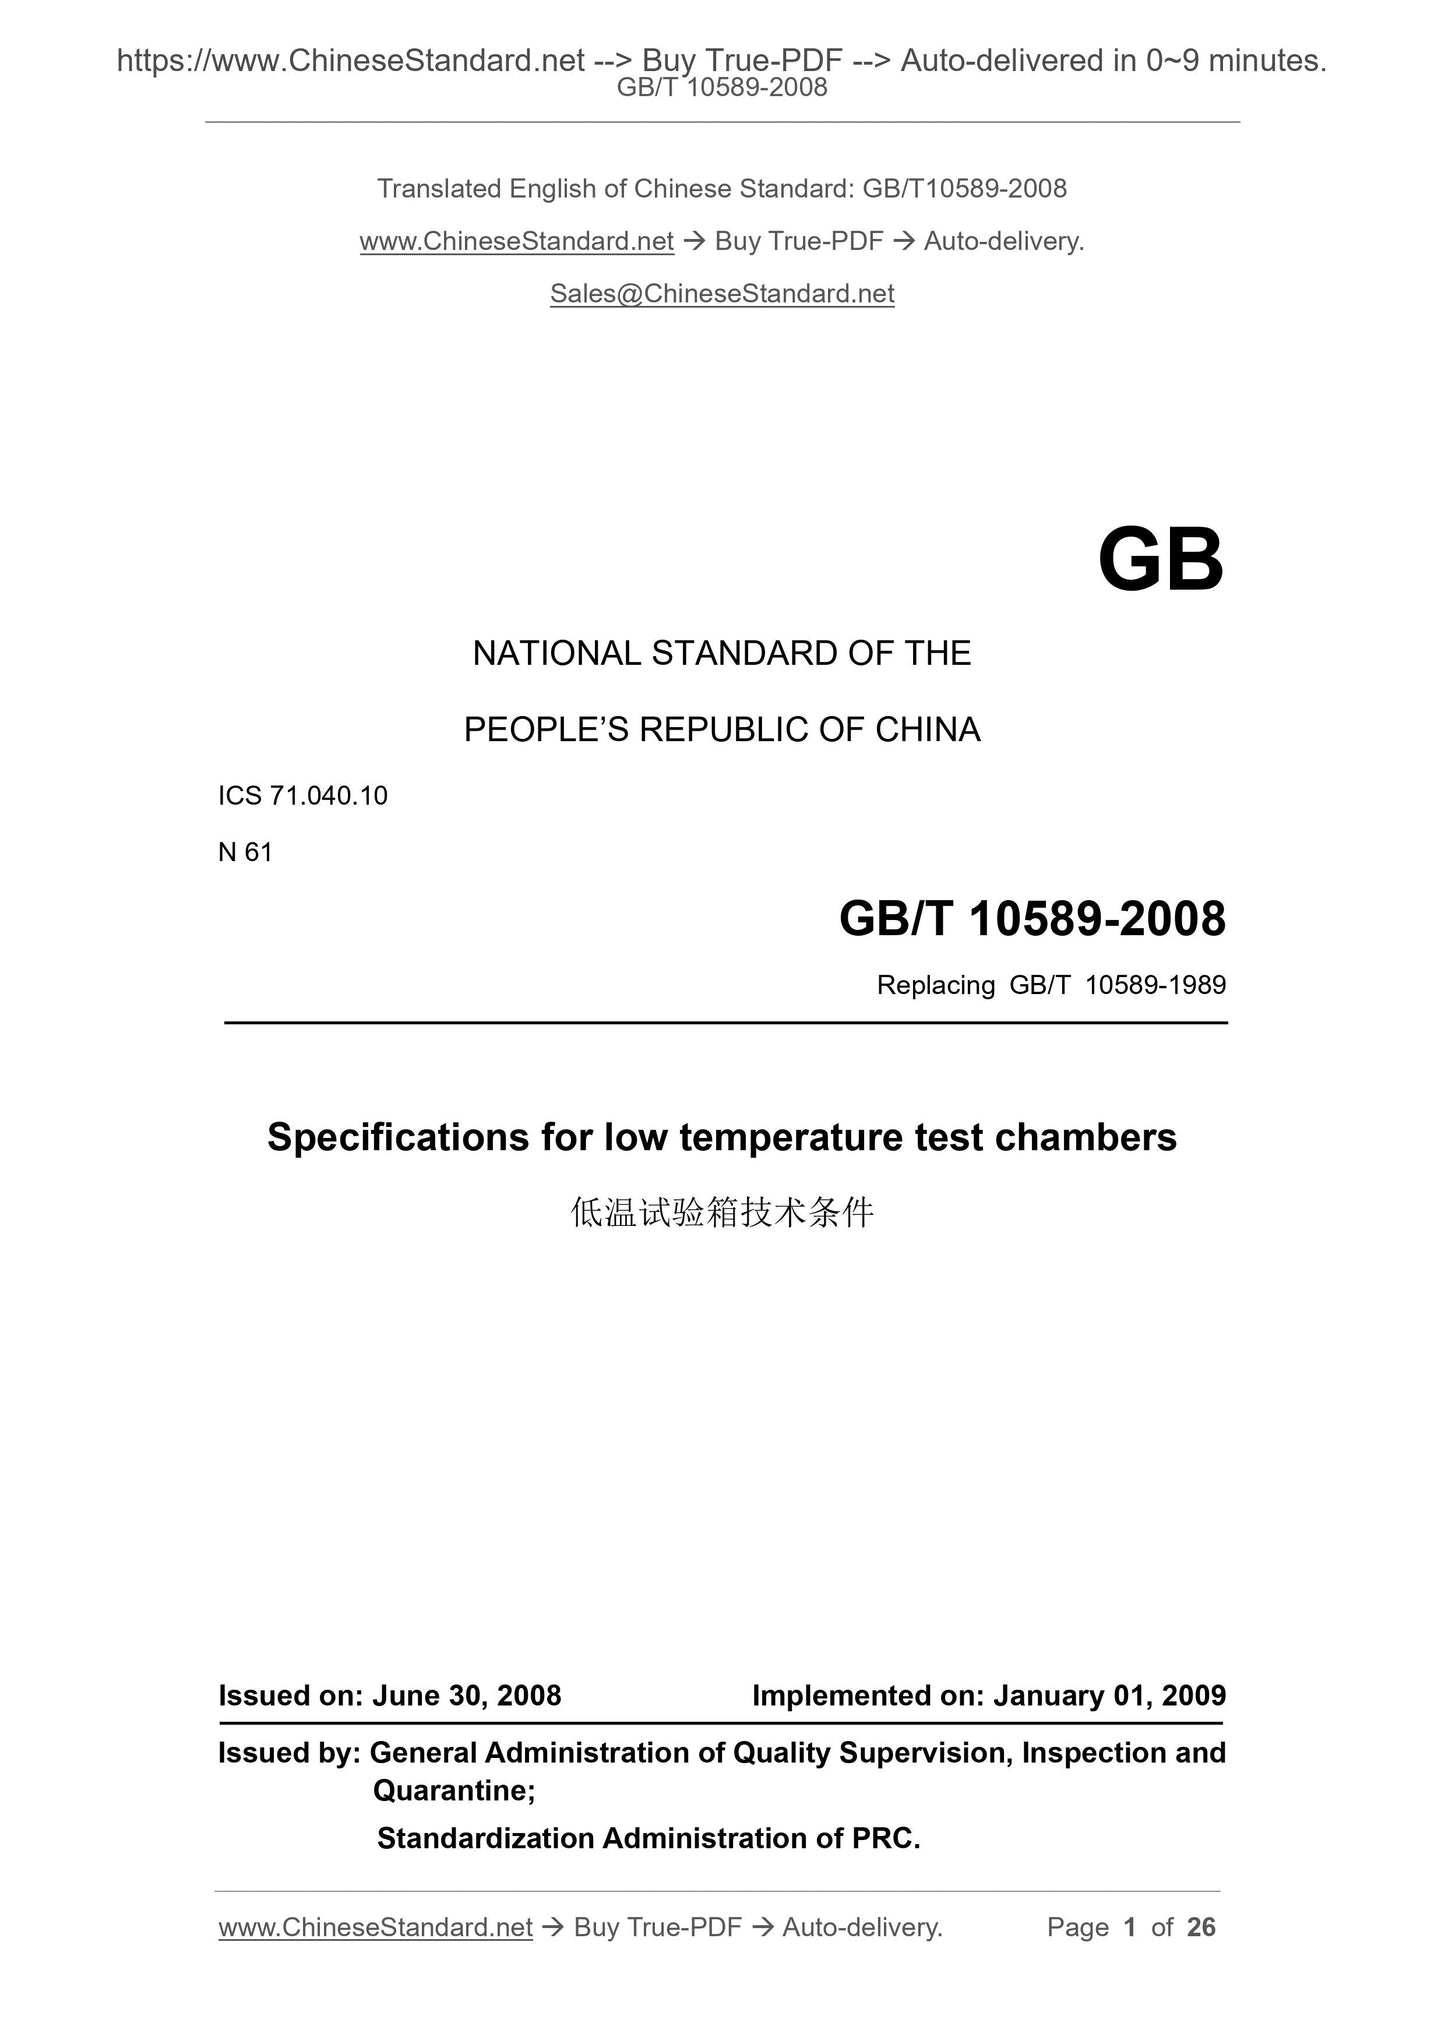 GB/T 10589-2008 Page 1